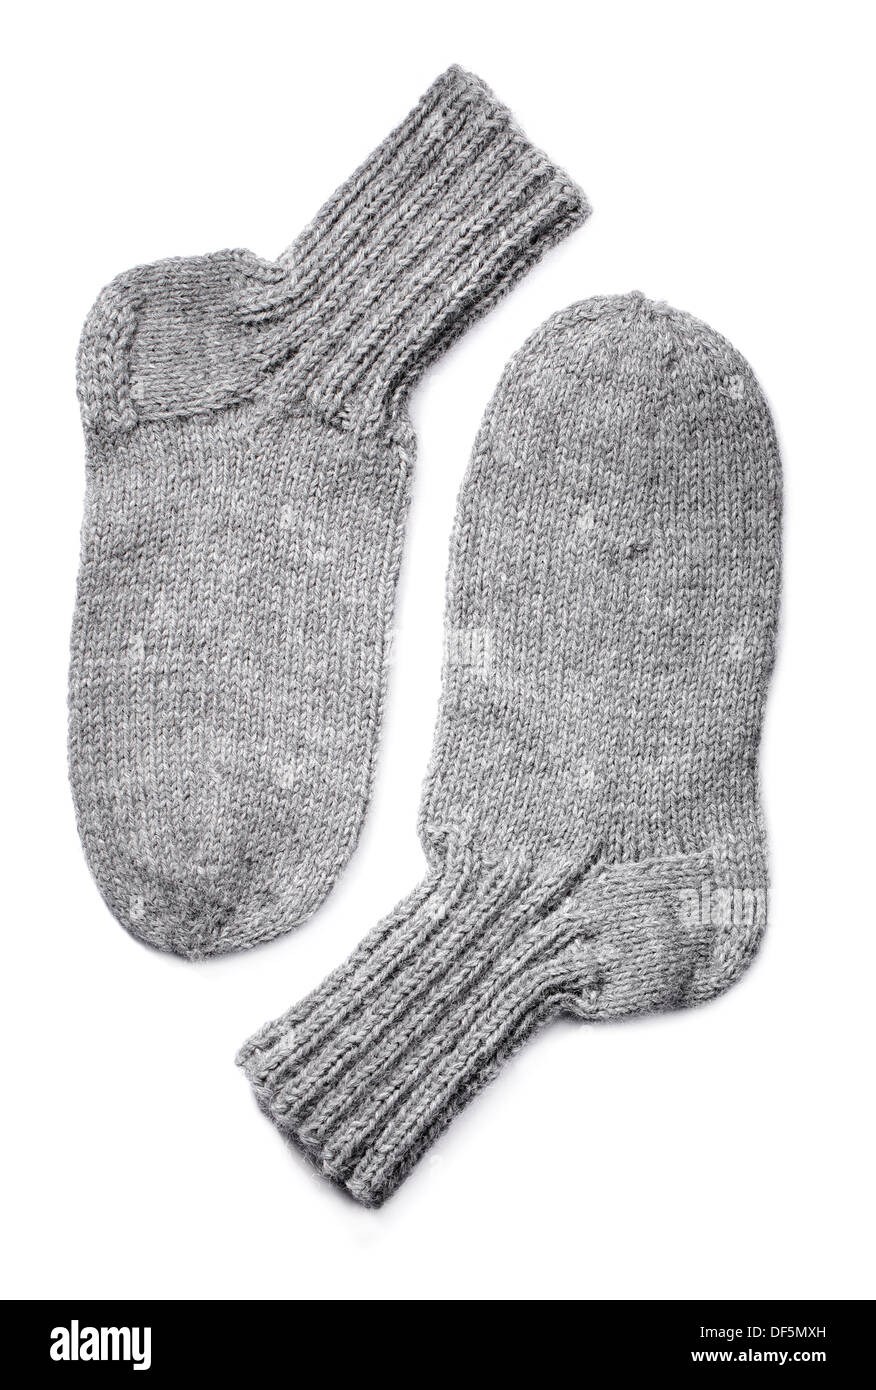 A Pair of hand-knit grey wool socks on white background with natural shadows. Stock Photo